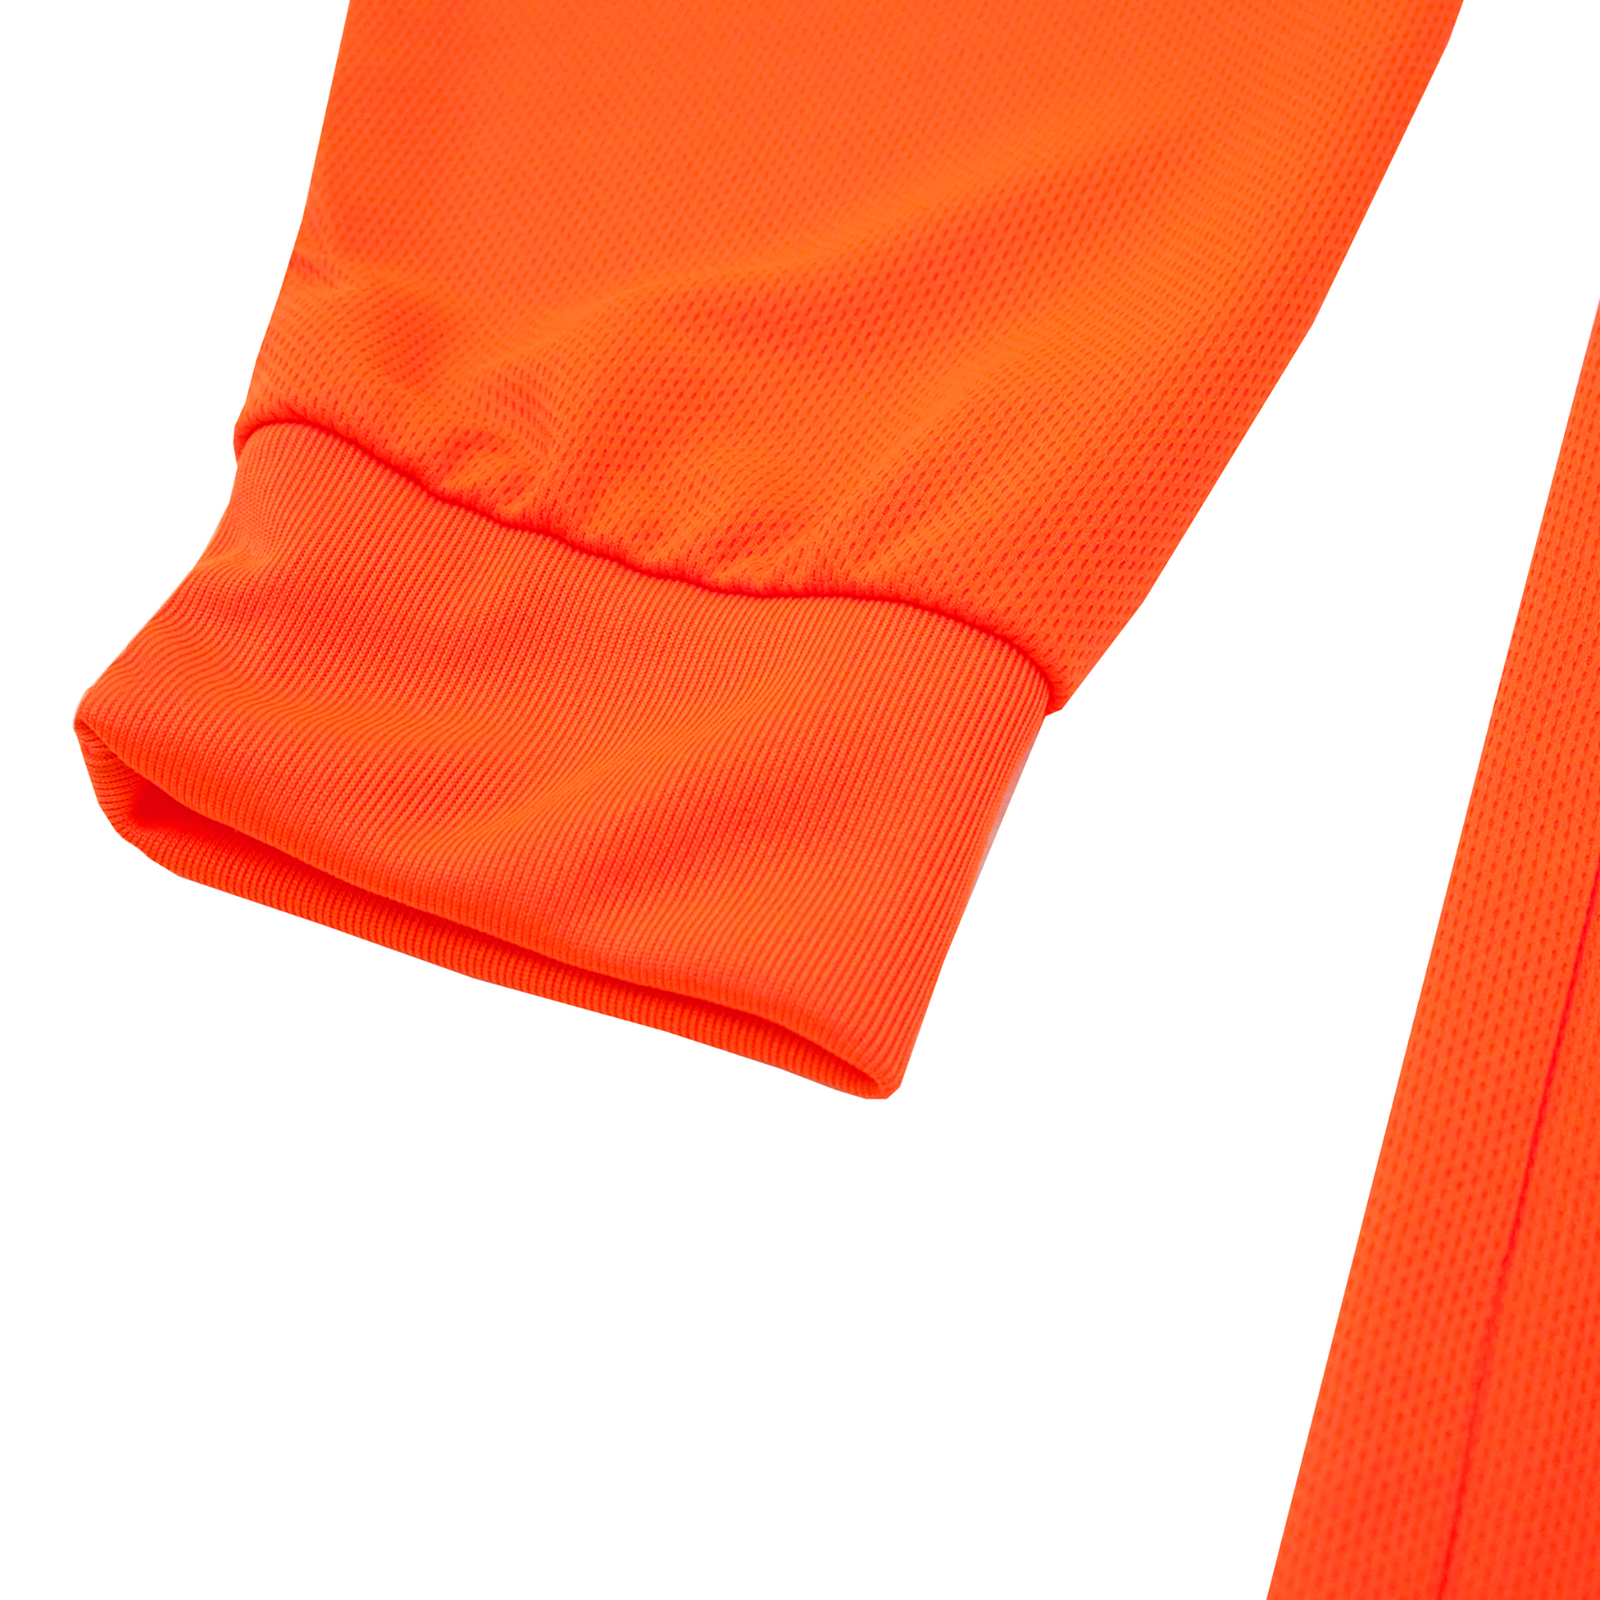 The elastic cuff of an orange long sleeve safety shirt with beathable fabric